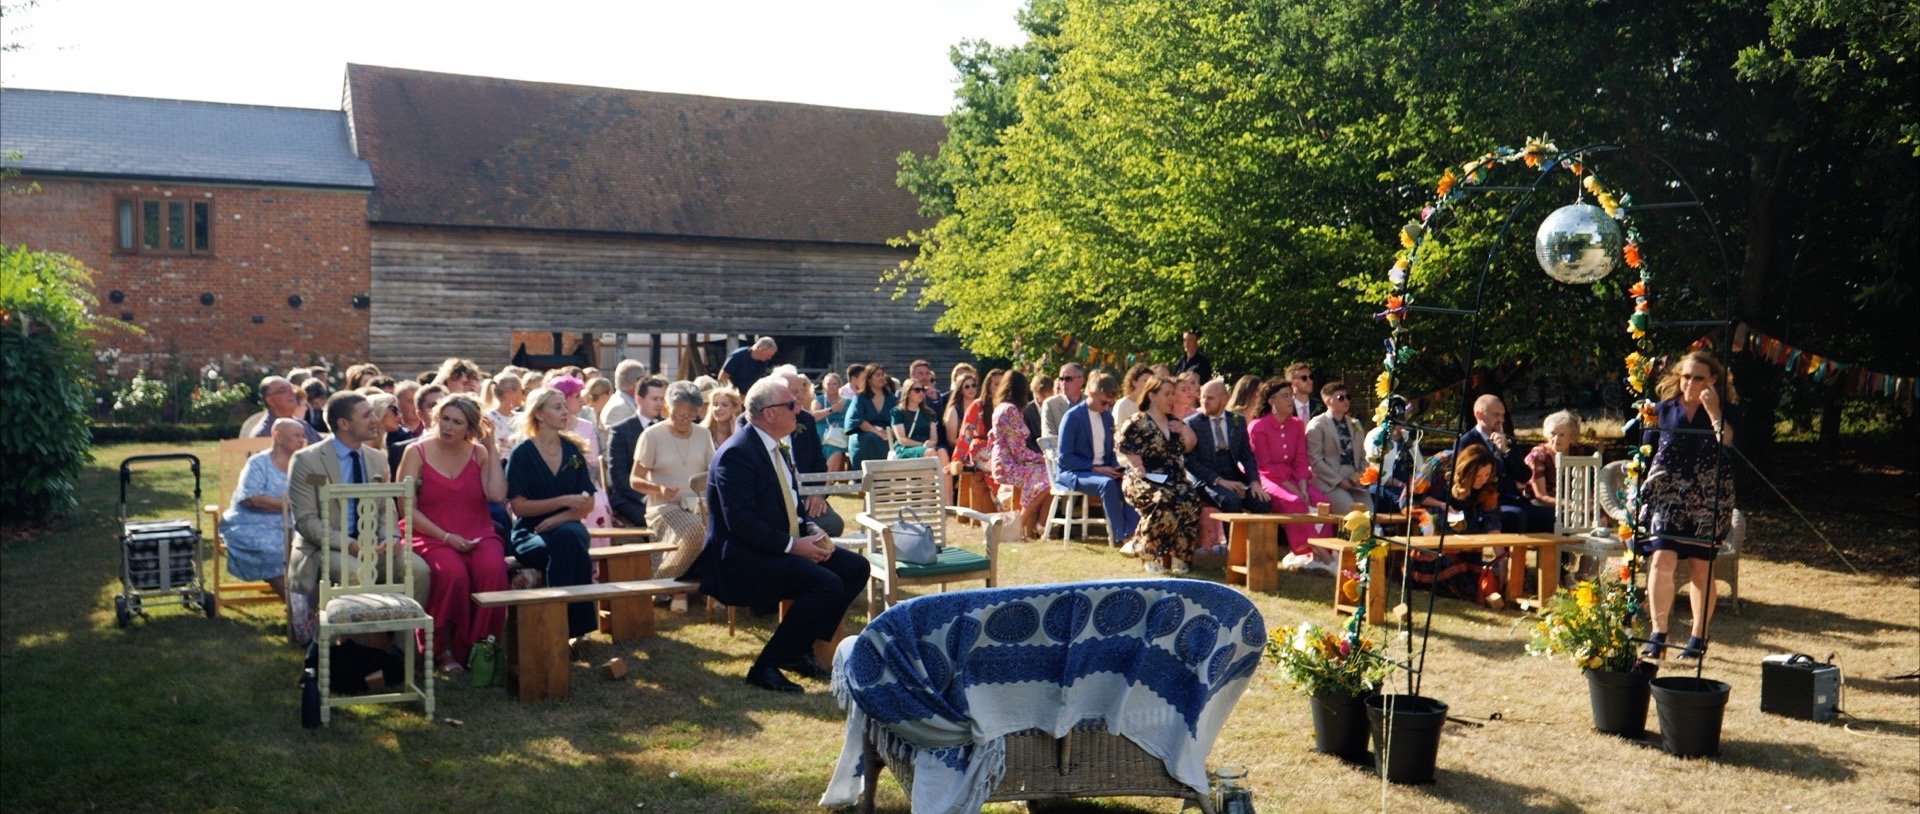 The outsaide ceremony at Apton Hall wedding video.jpg